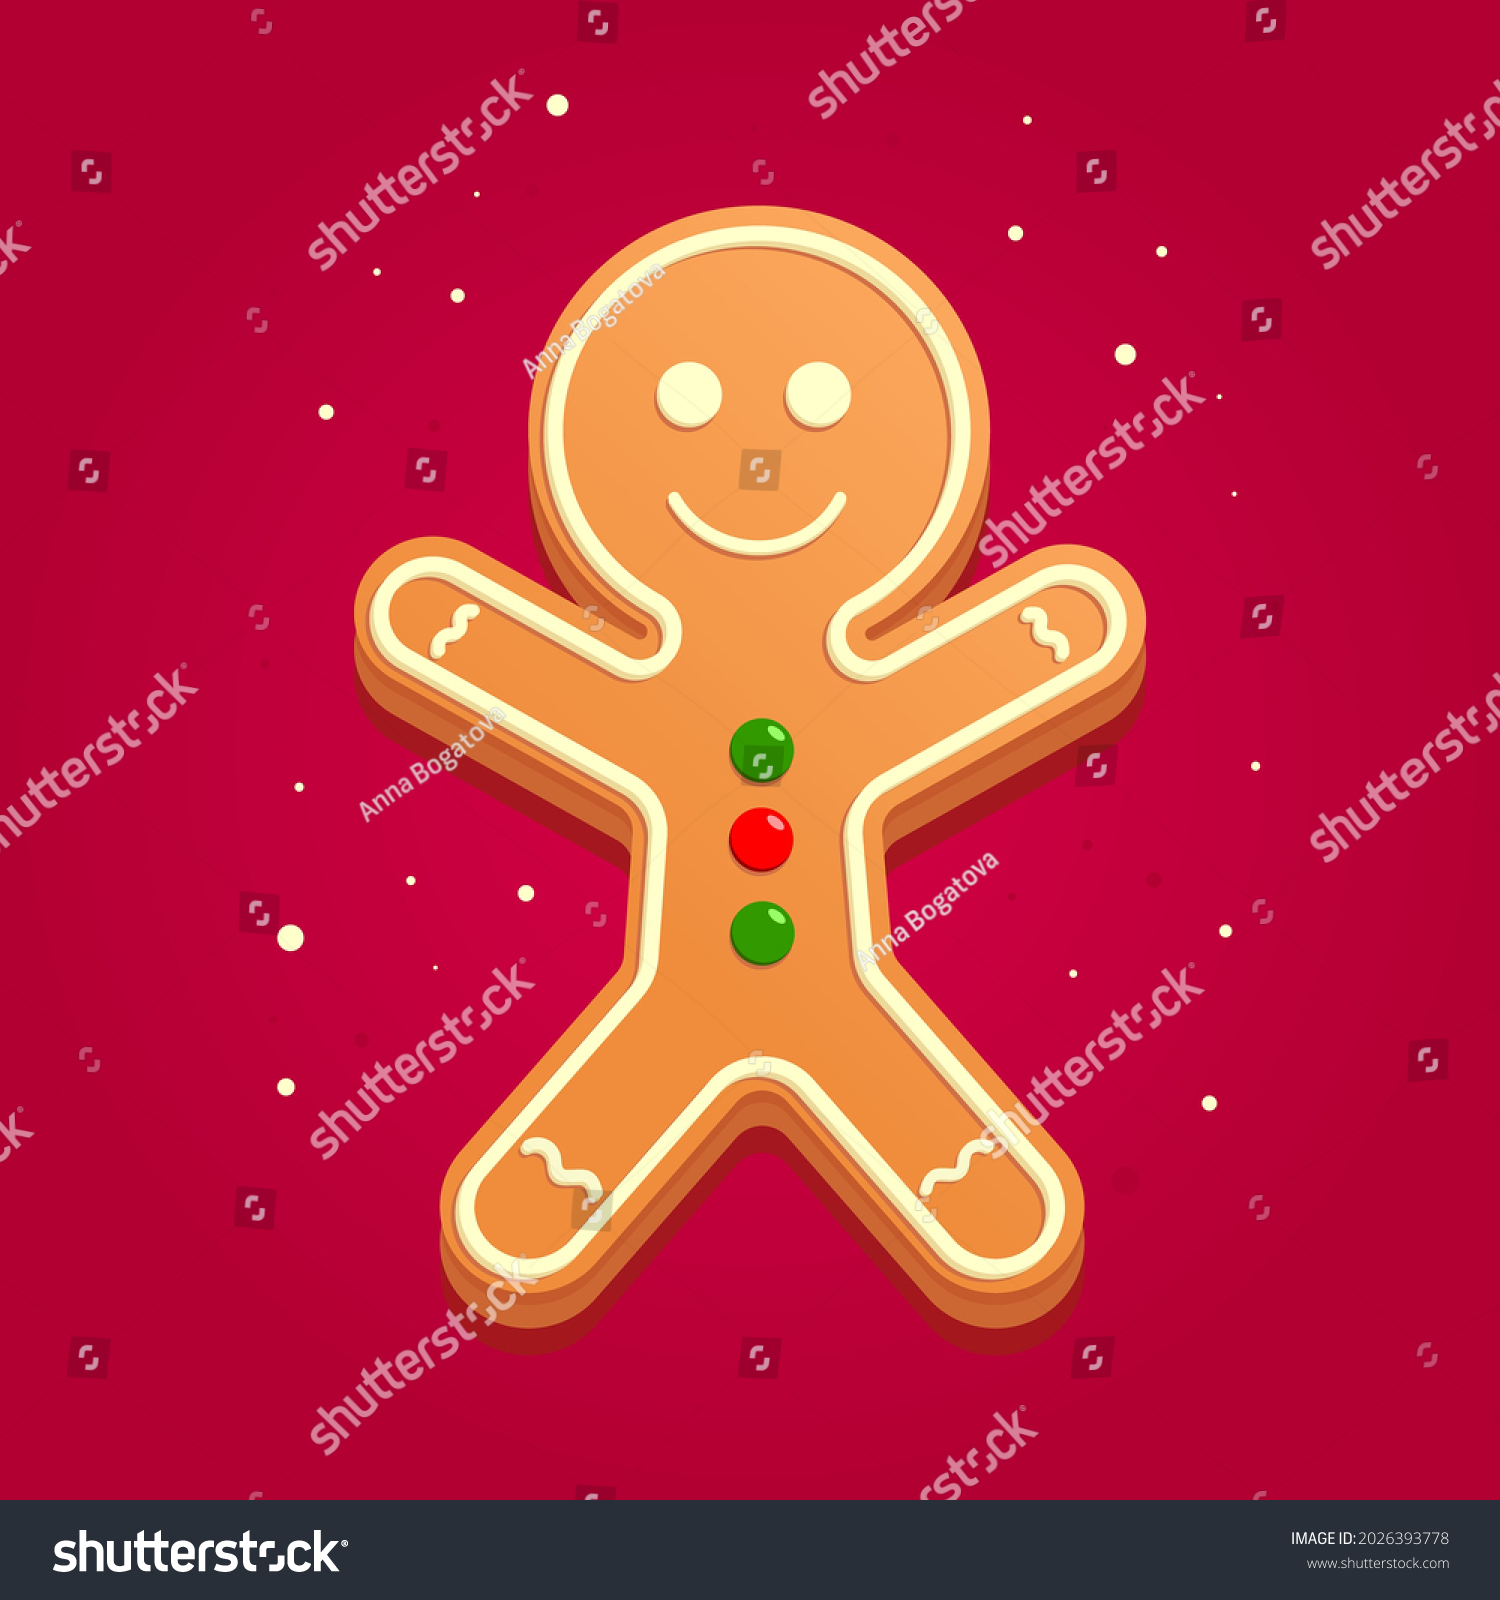 SVG of Gingerbread man on a red background svg